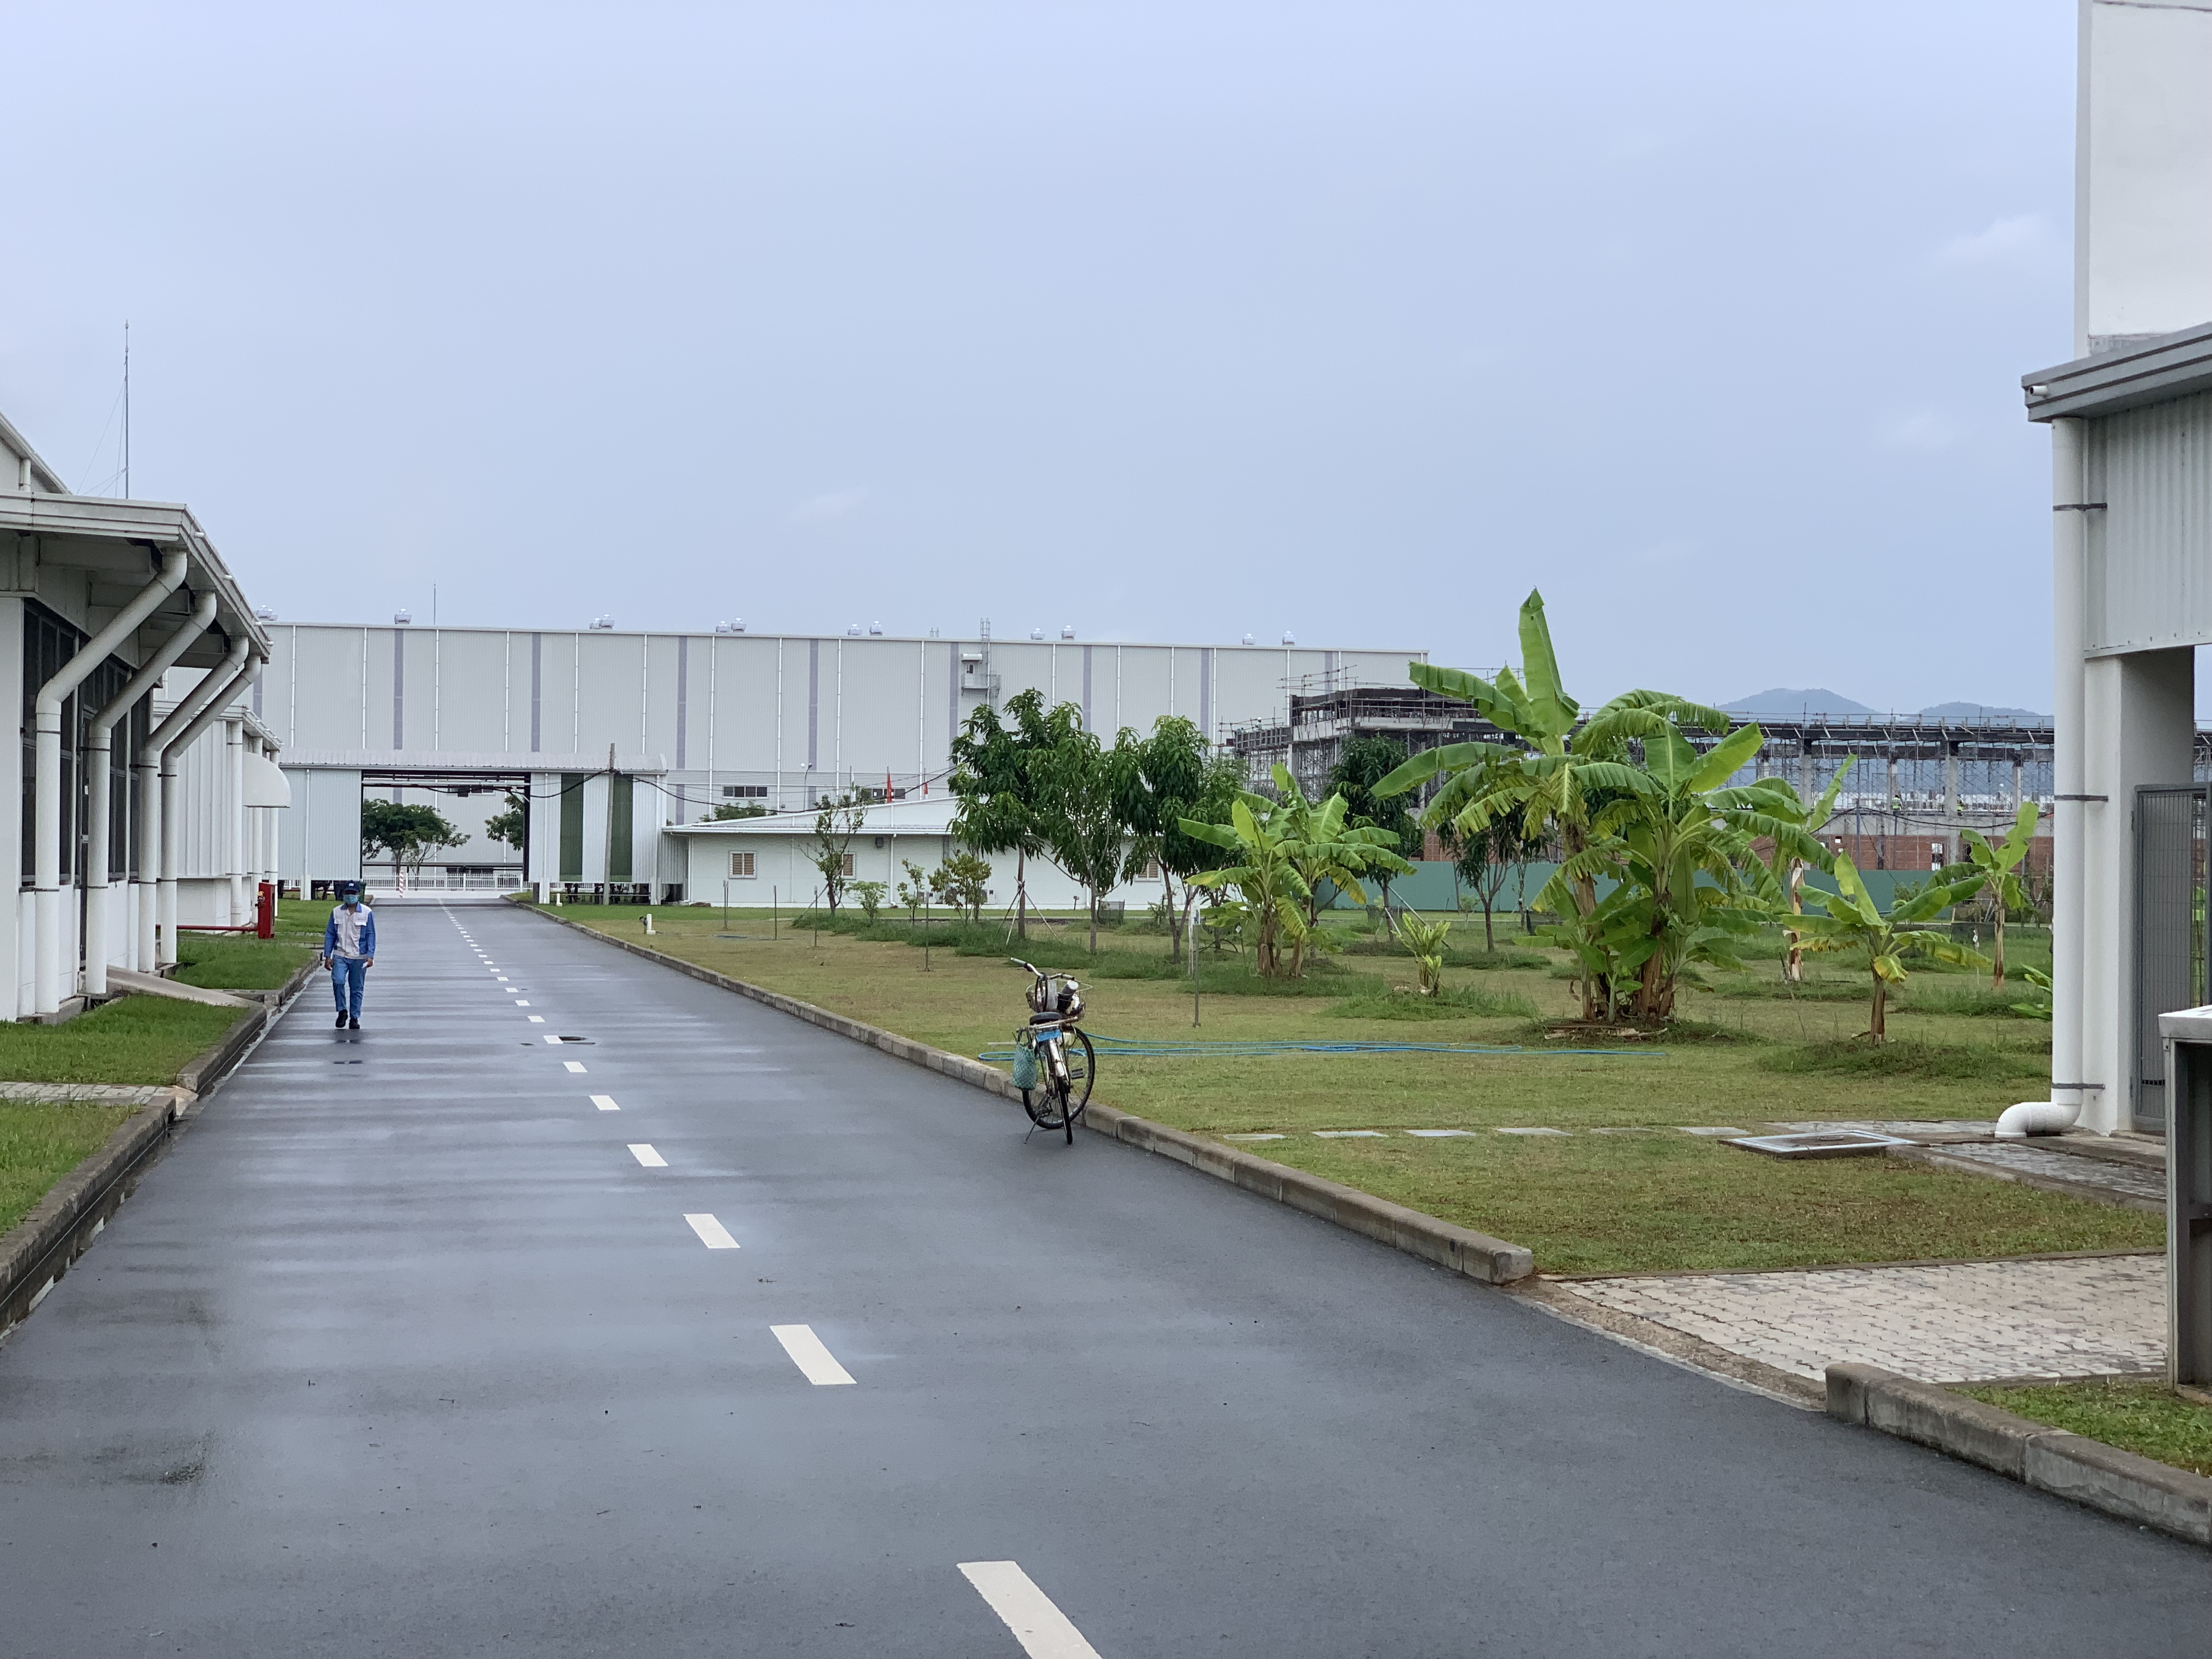 Peaceful and green industrial park